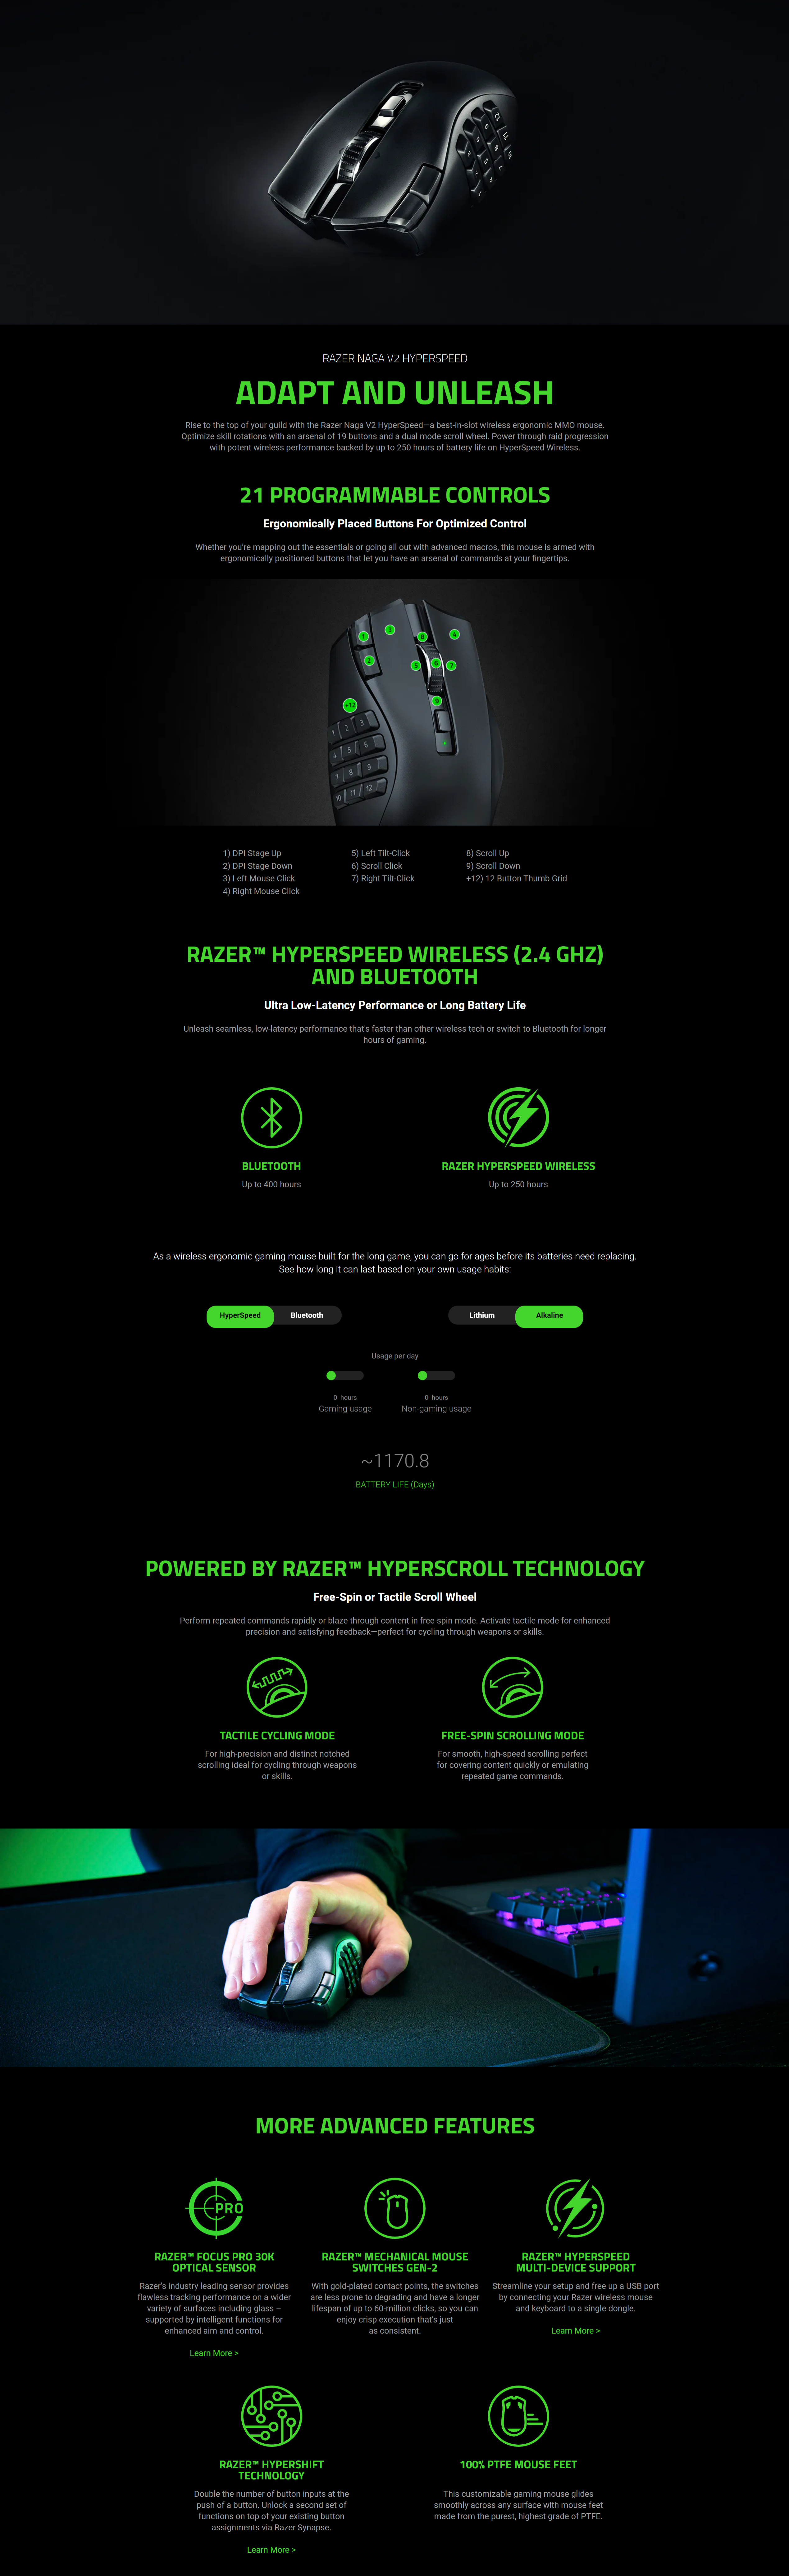 A large marketing image providing additional information about the product Razer Naga V2 HyperSpeed - Wireless MMO Gaming Mouse - Additional alt info not provided